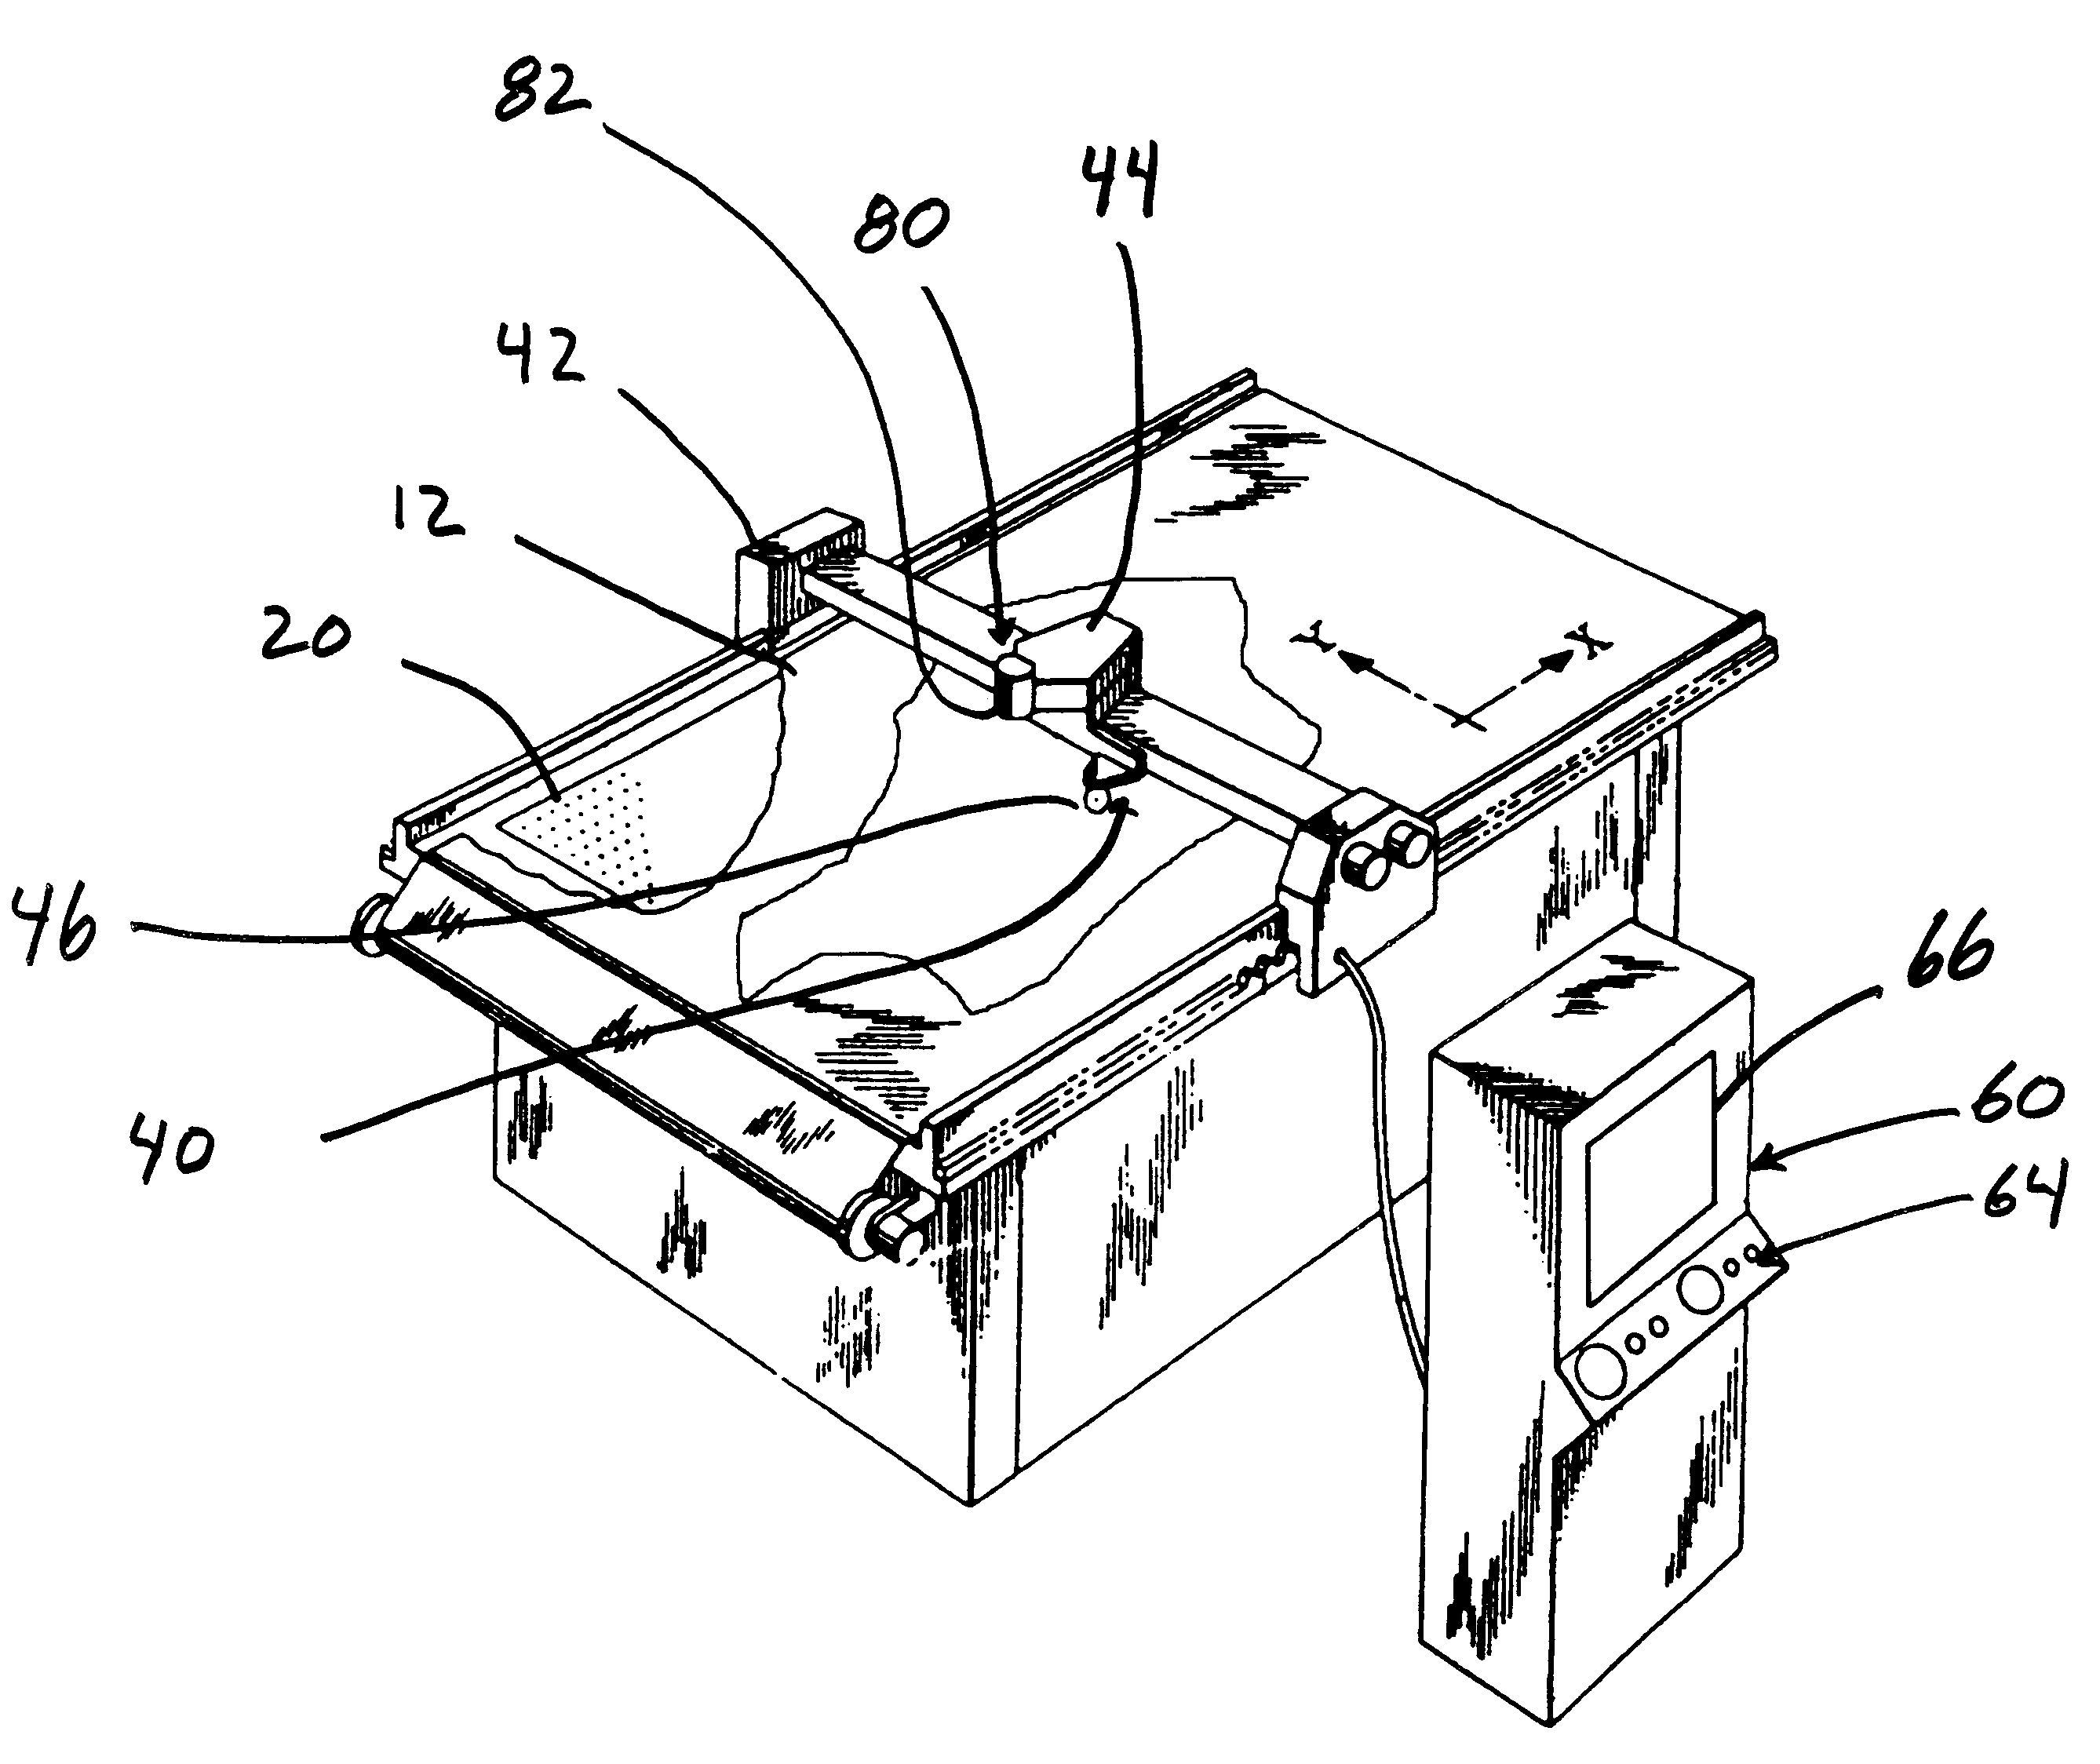 Method and apparatus for displaying an image of a sheet material and cutting parts from the sheet material